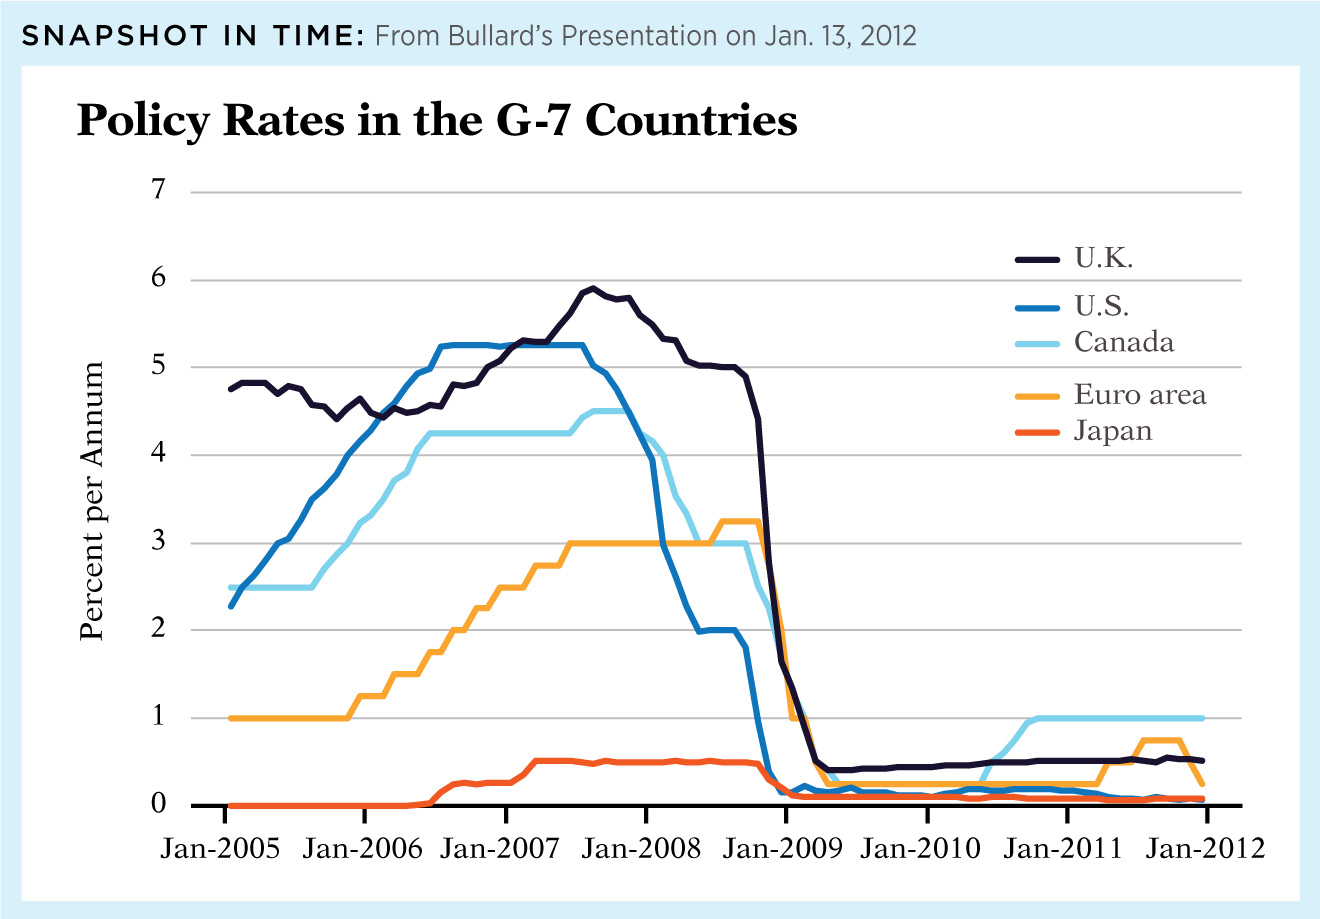 Policy Rates in the G-7 Countries